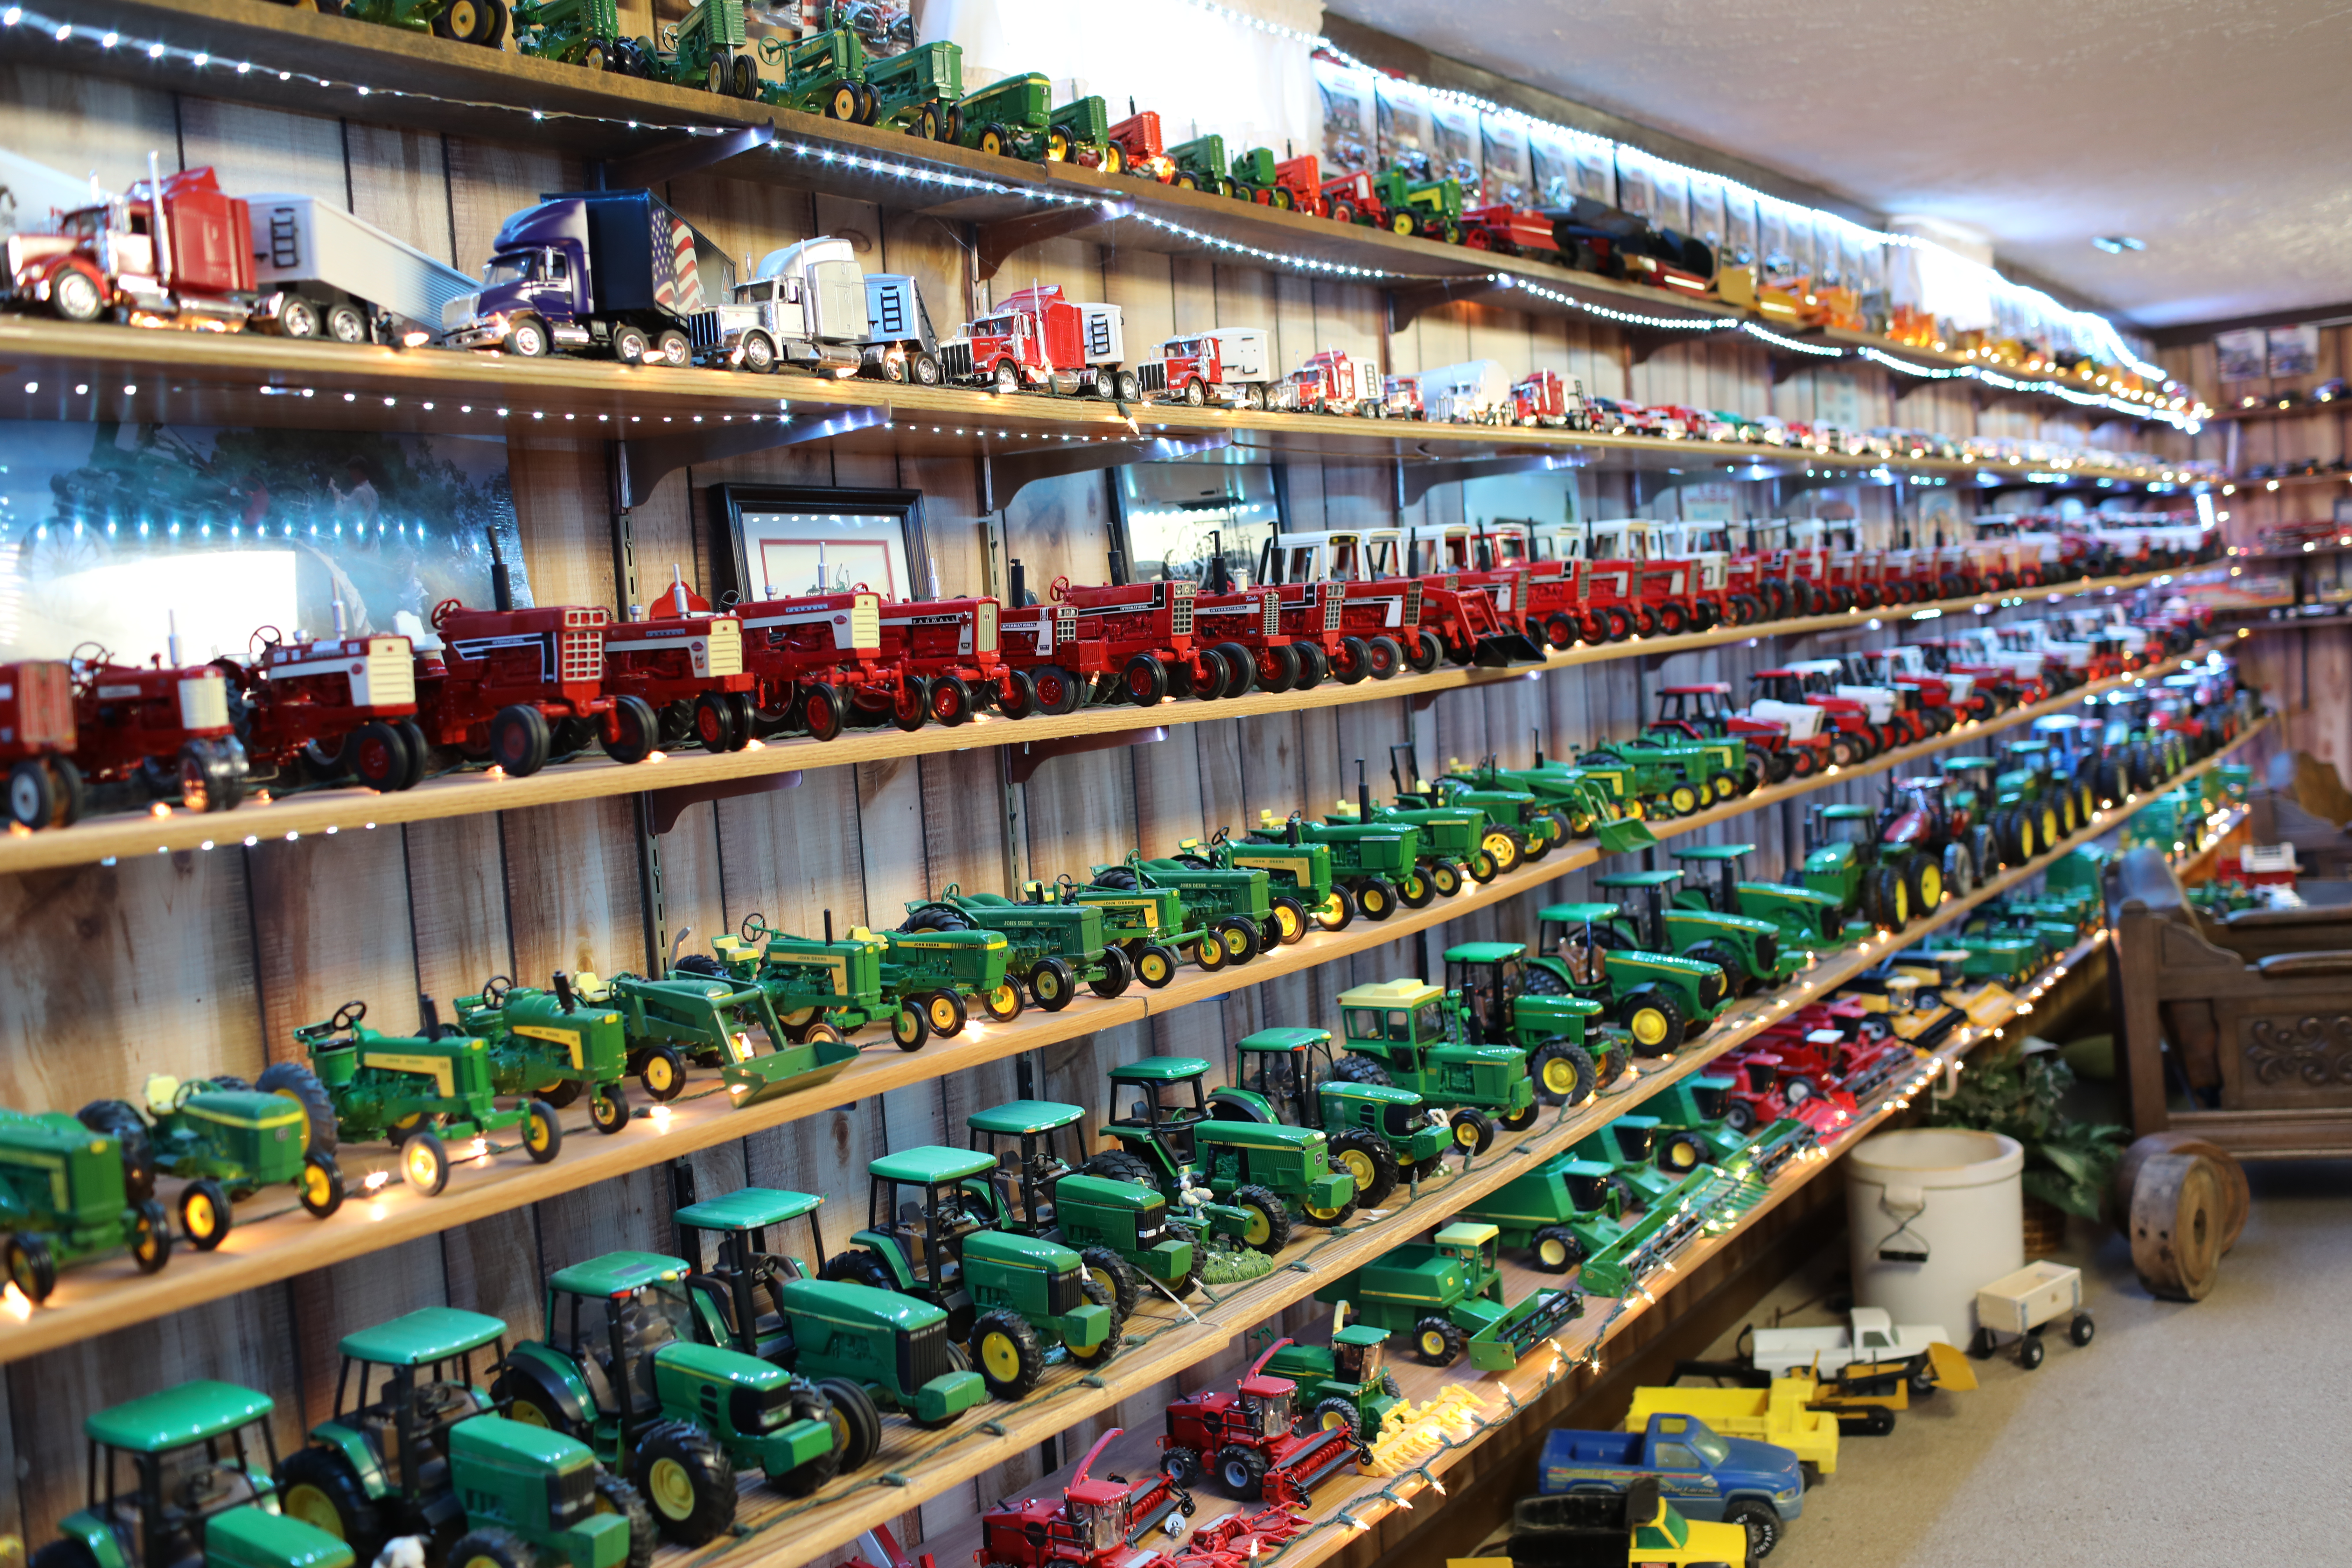 Toy tractor collection display